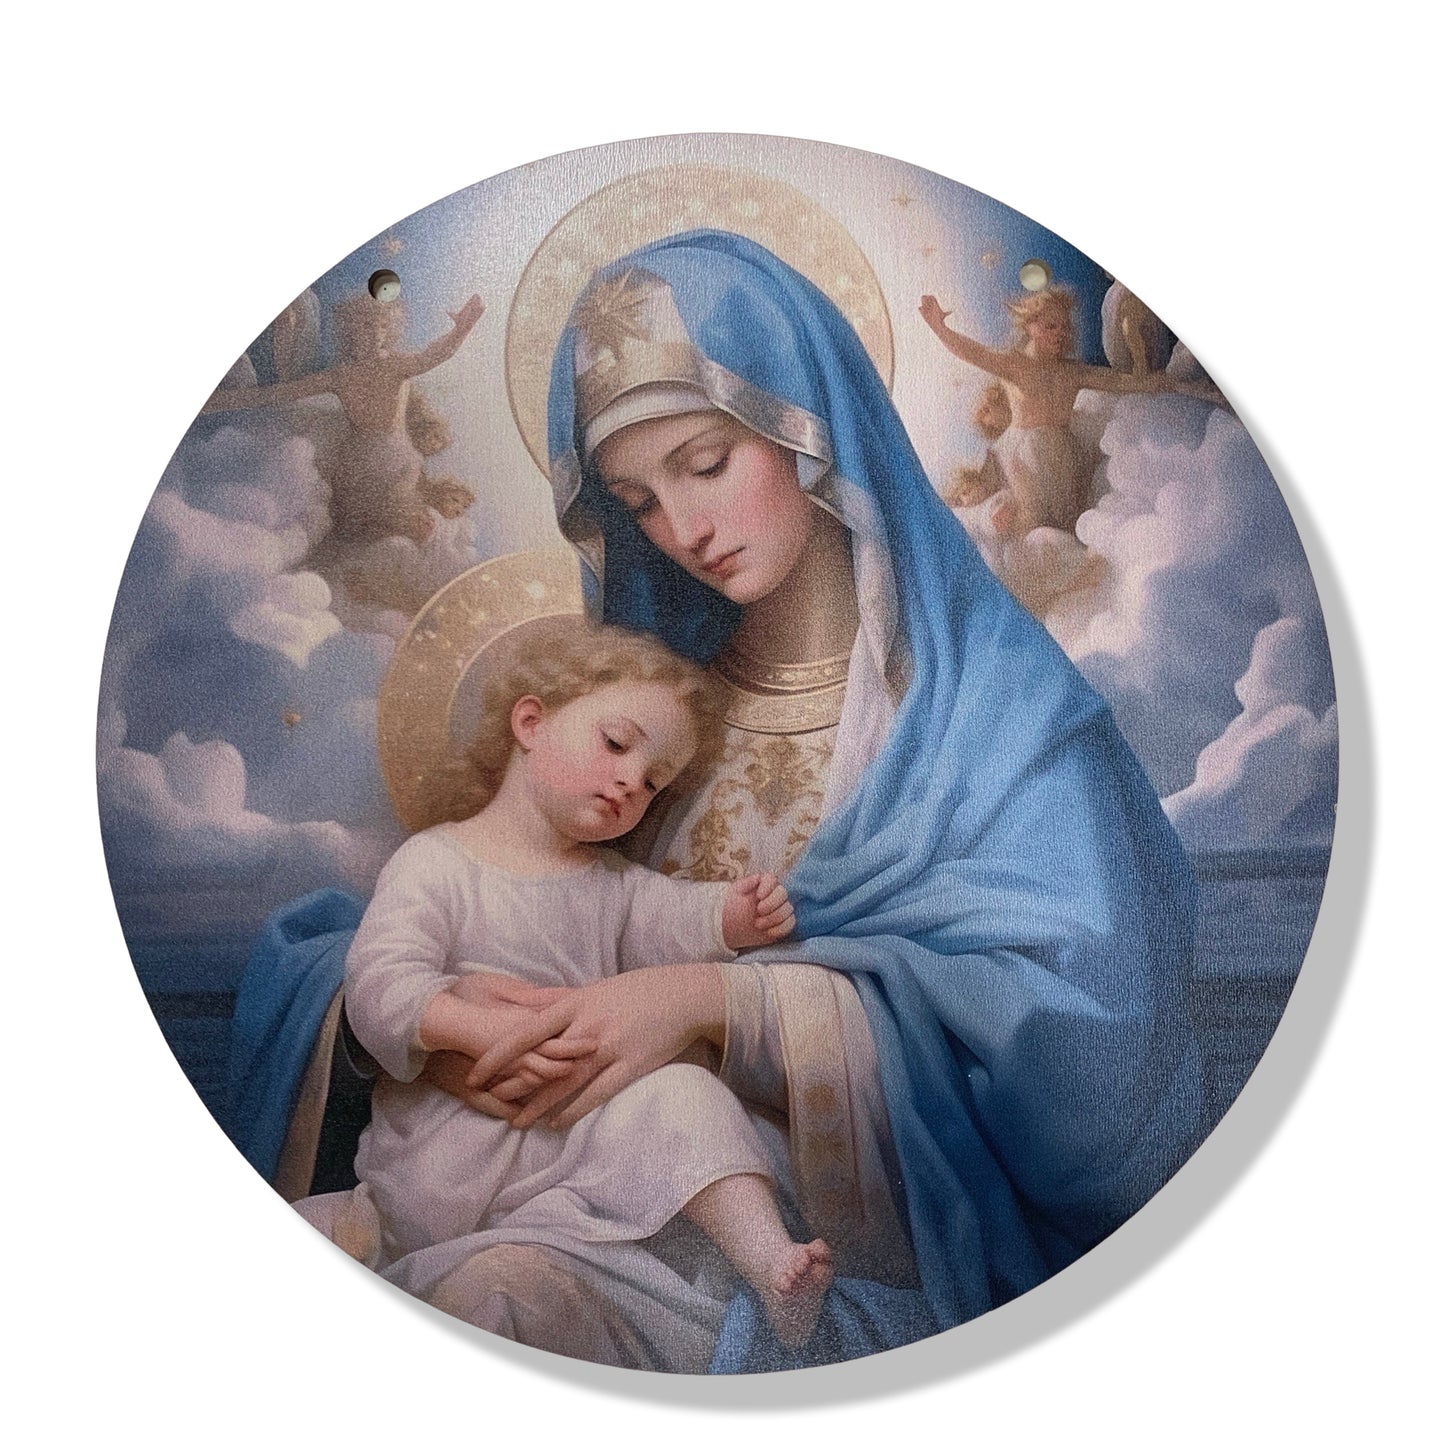 Assorted Round Images of Our Lady